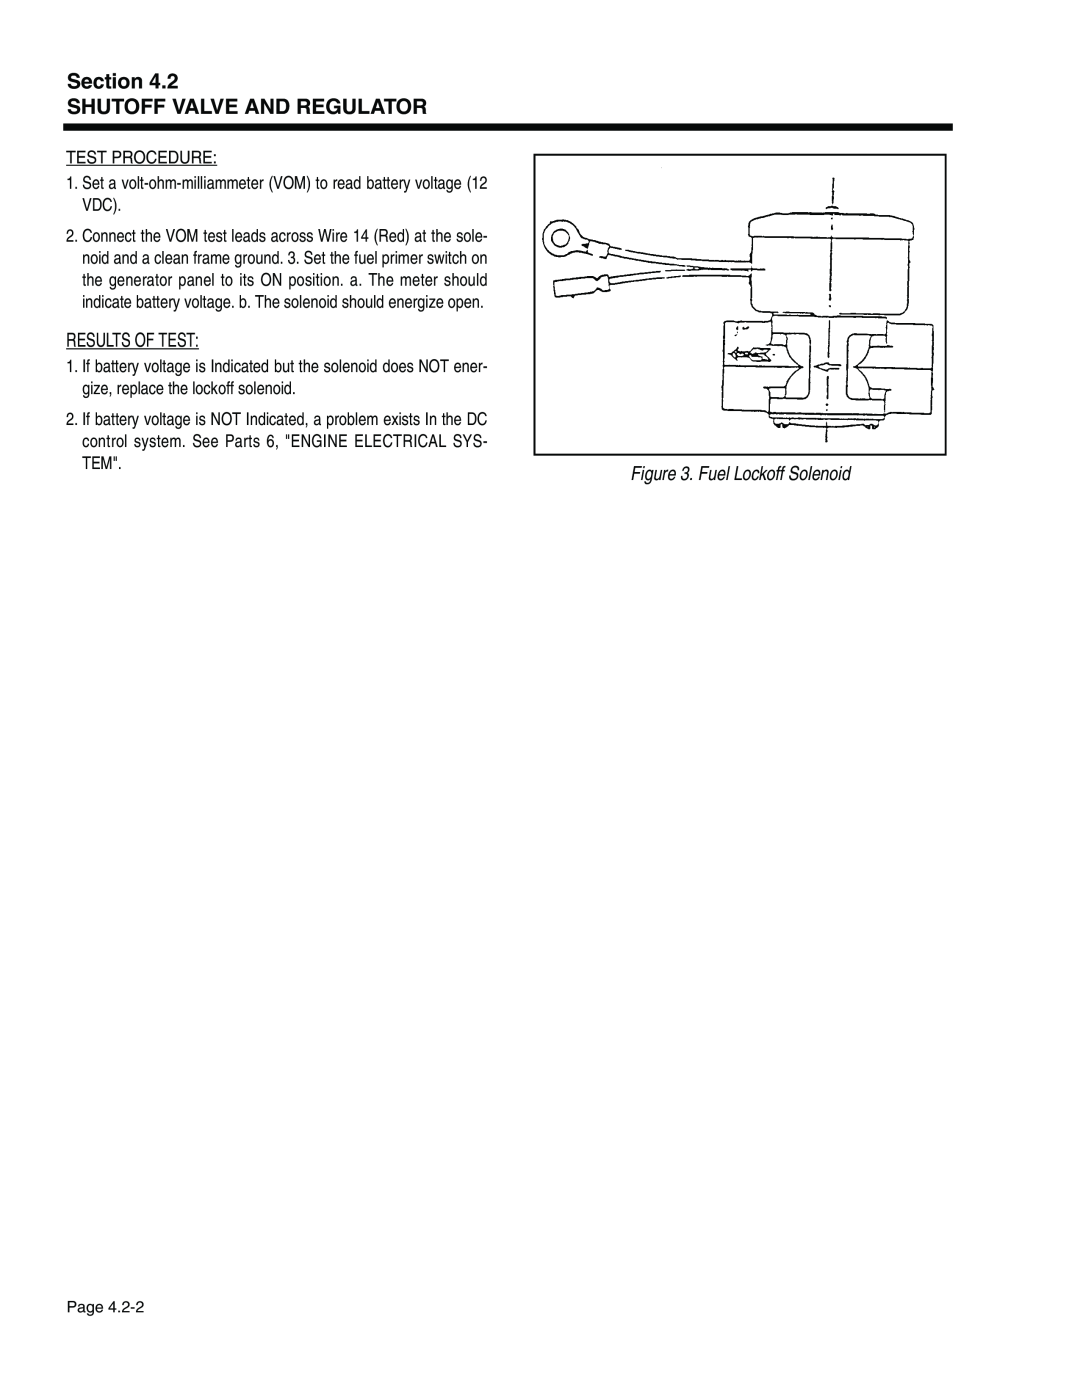 Generac Power Systems 940-2, 941-2 Section SHUTOFF VALVE AND REGULATOR, Results Of Test, Fuel Lockoff Solenoid, Page 